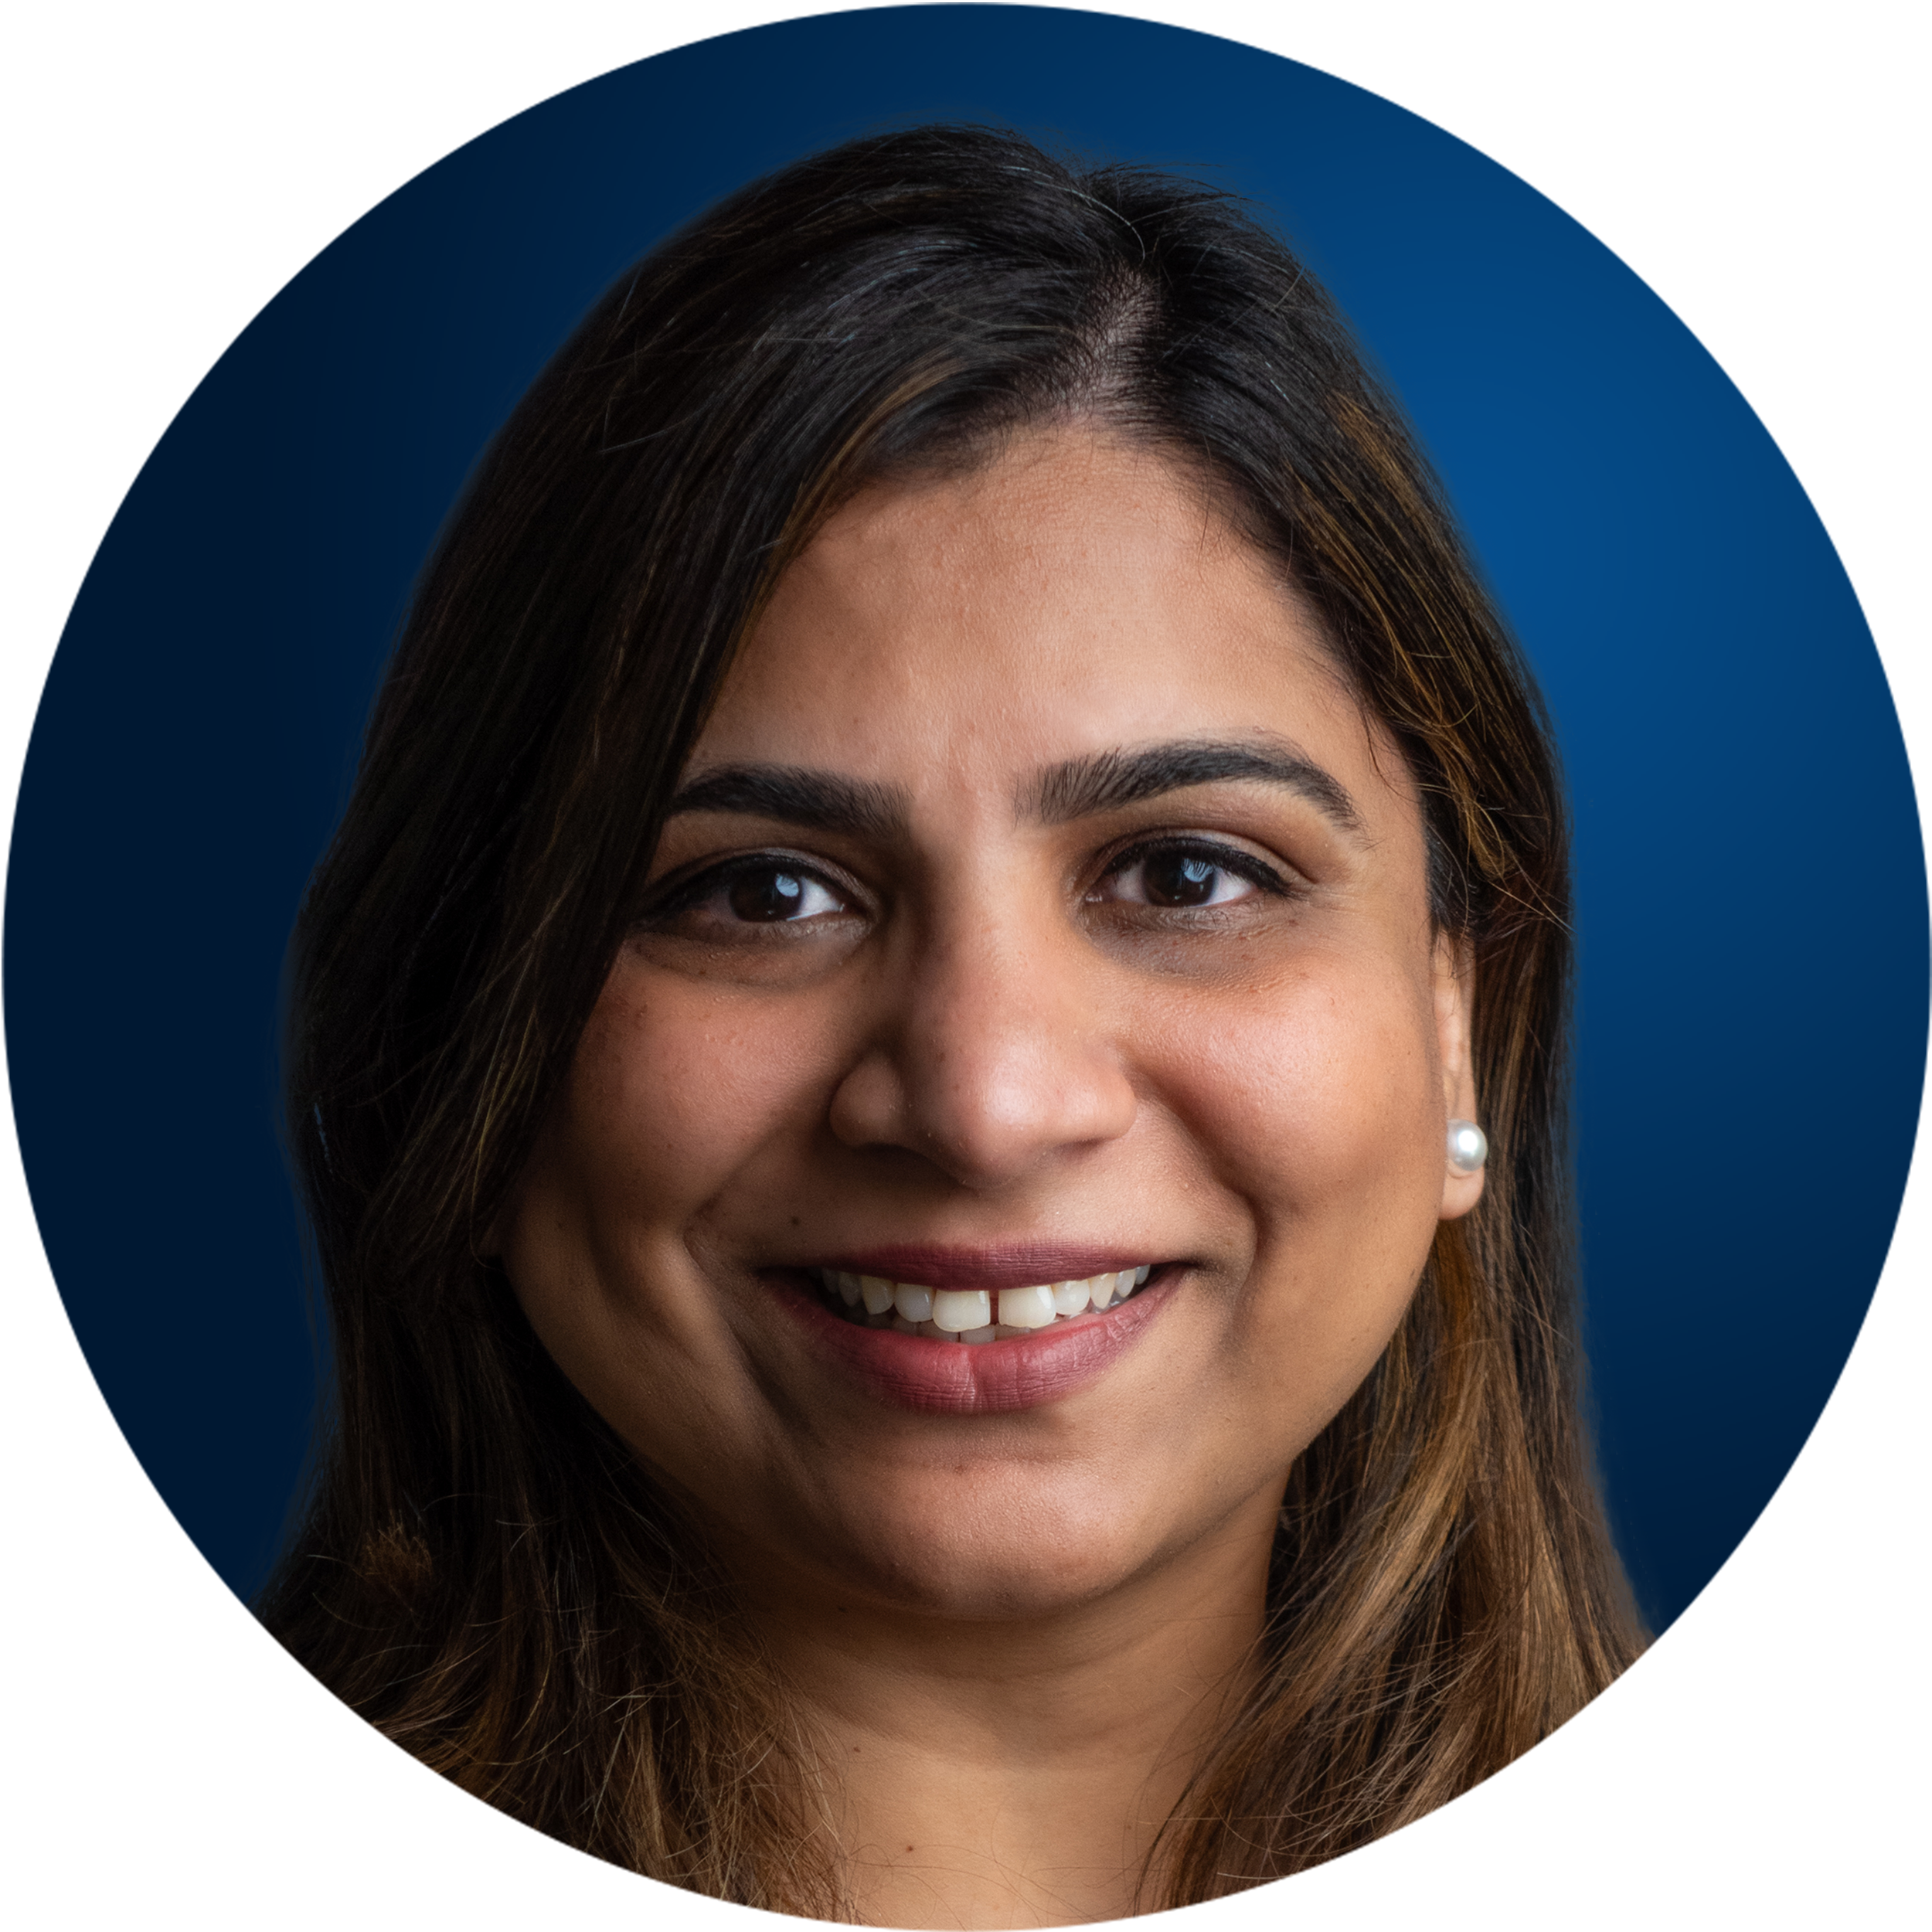 DIPALI PATEL, MD
VP, MEDICAL AND SCIENTIFIC AFFAIRS